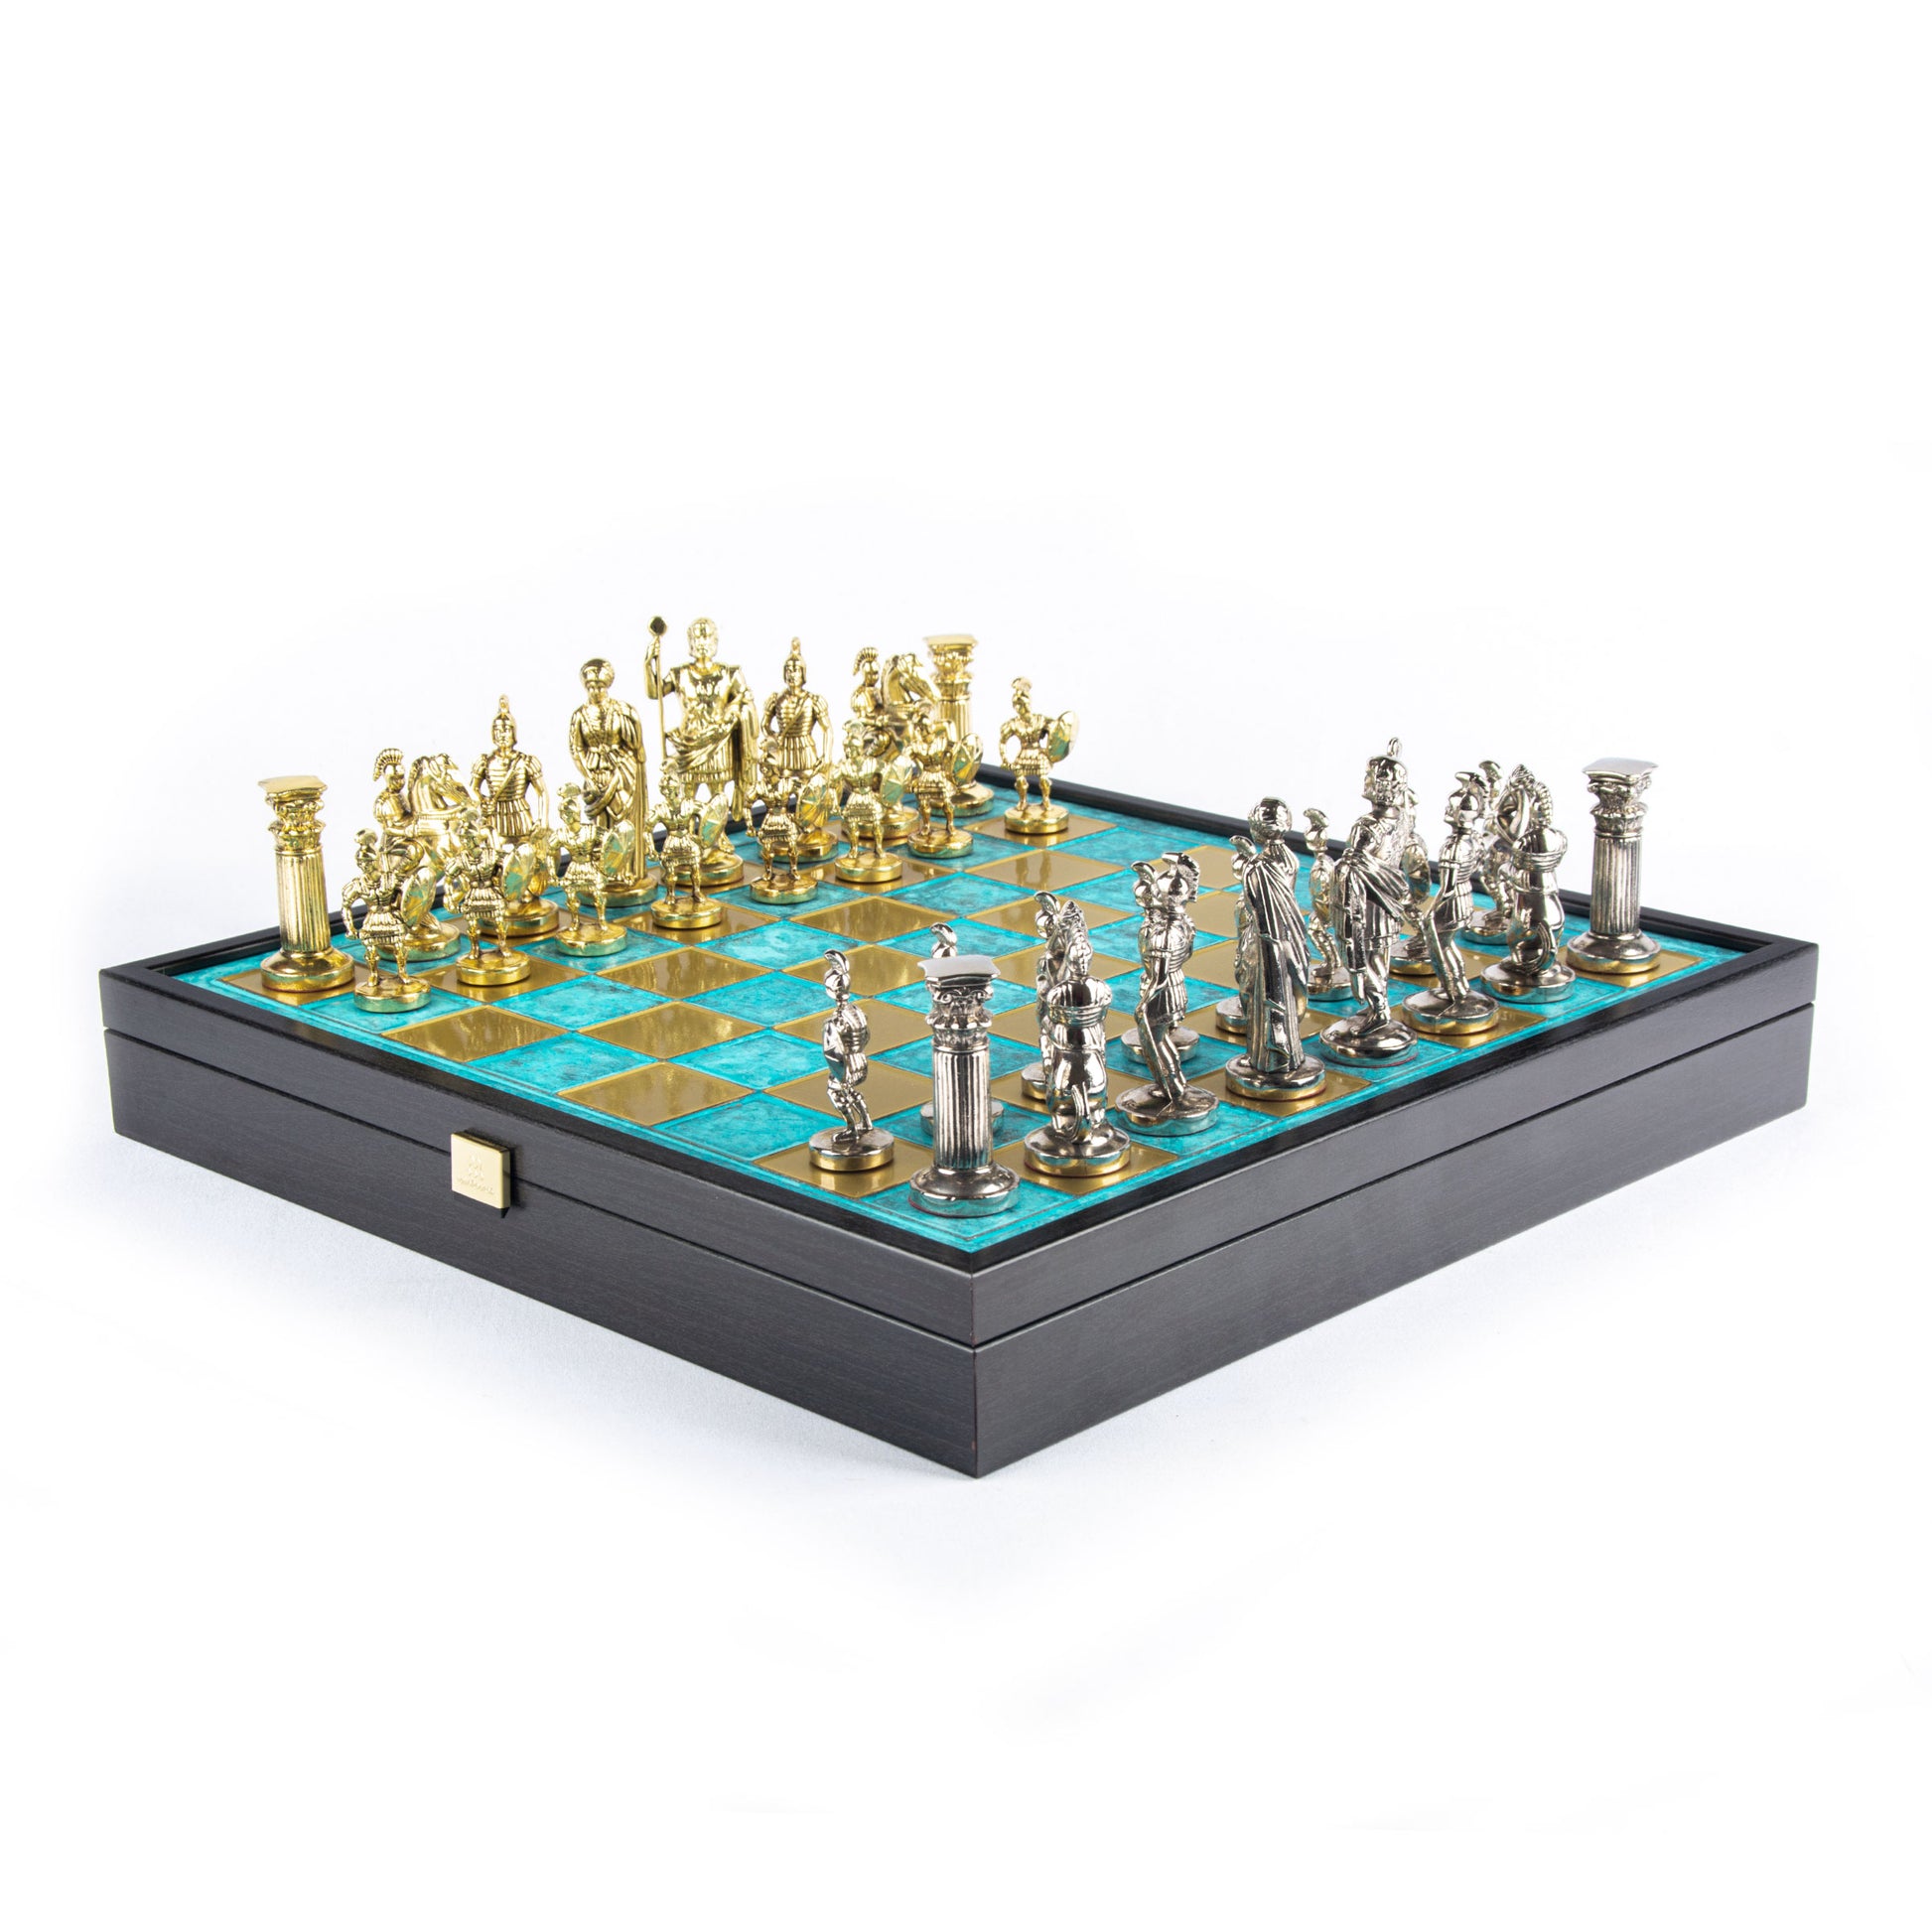 GREEK ROMAN PERIOD CHESS SET in wooden box with gold/silver chessmen and bronze chessboard 41 x 41cm (Large) - Premium Chess from MANOPOULOS Chess & Backgammon - Just €239! Shop now at MANOPOULOS Chess & Backgammon